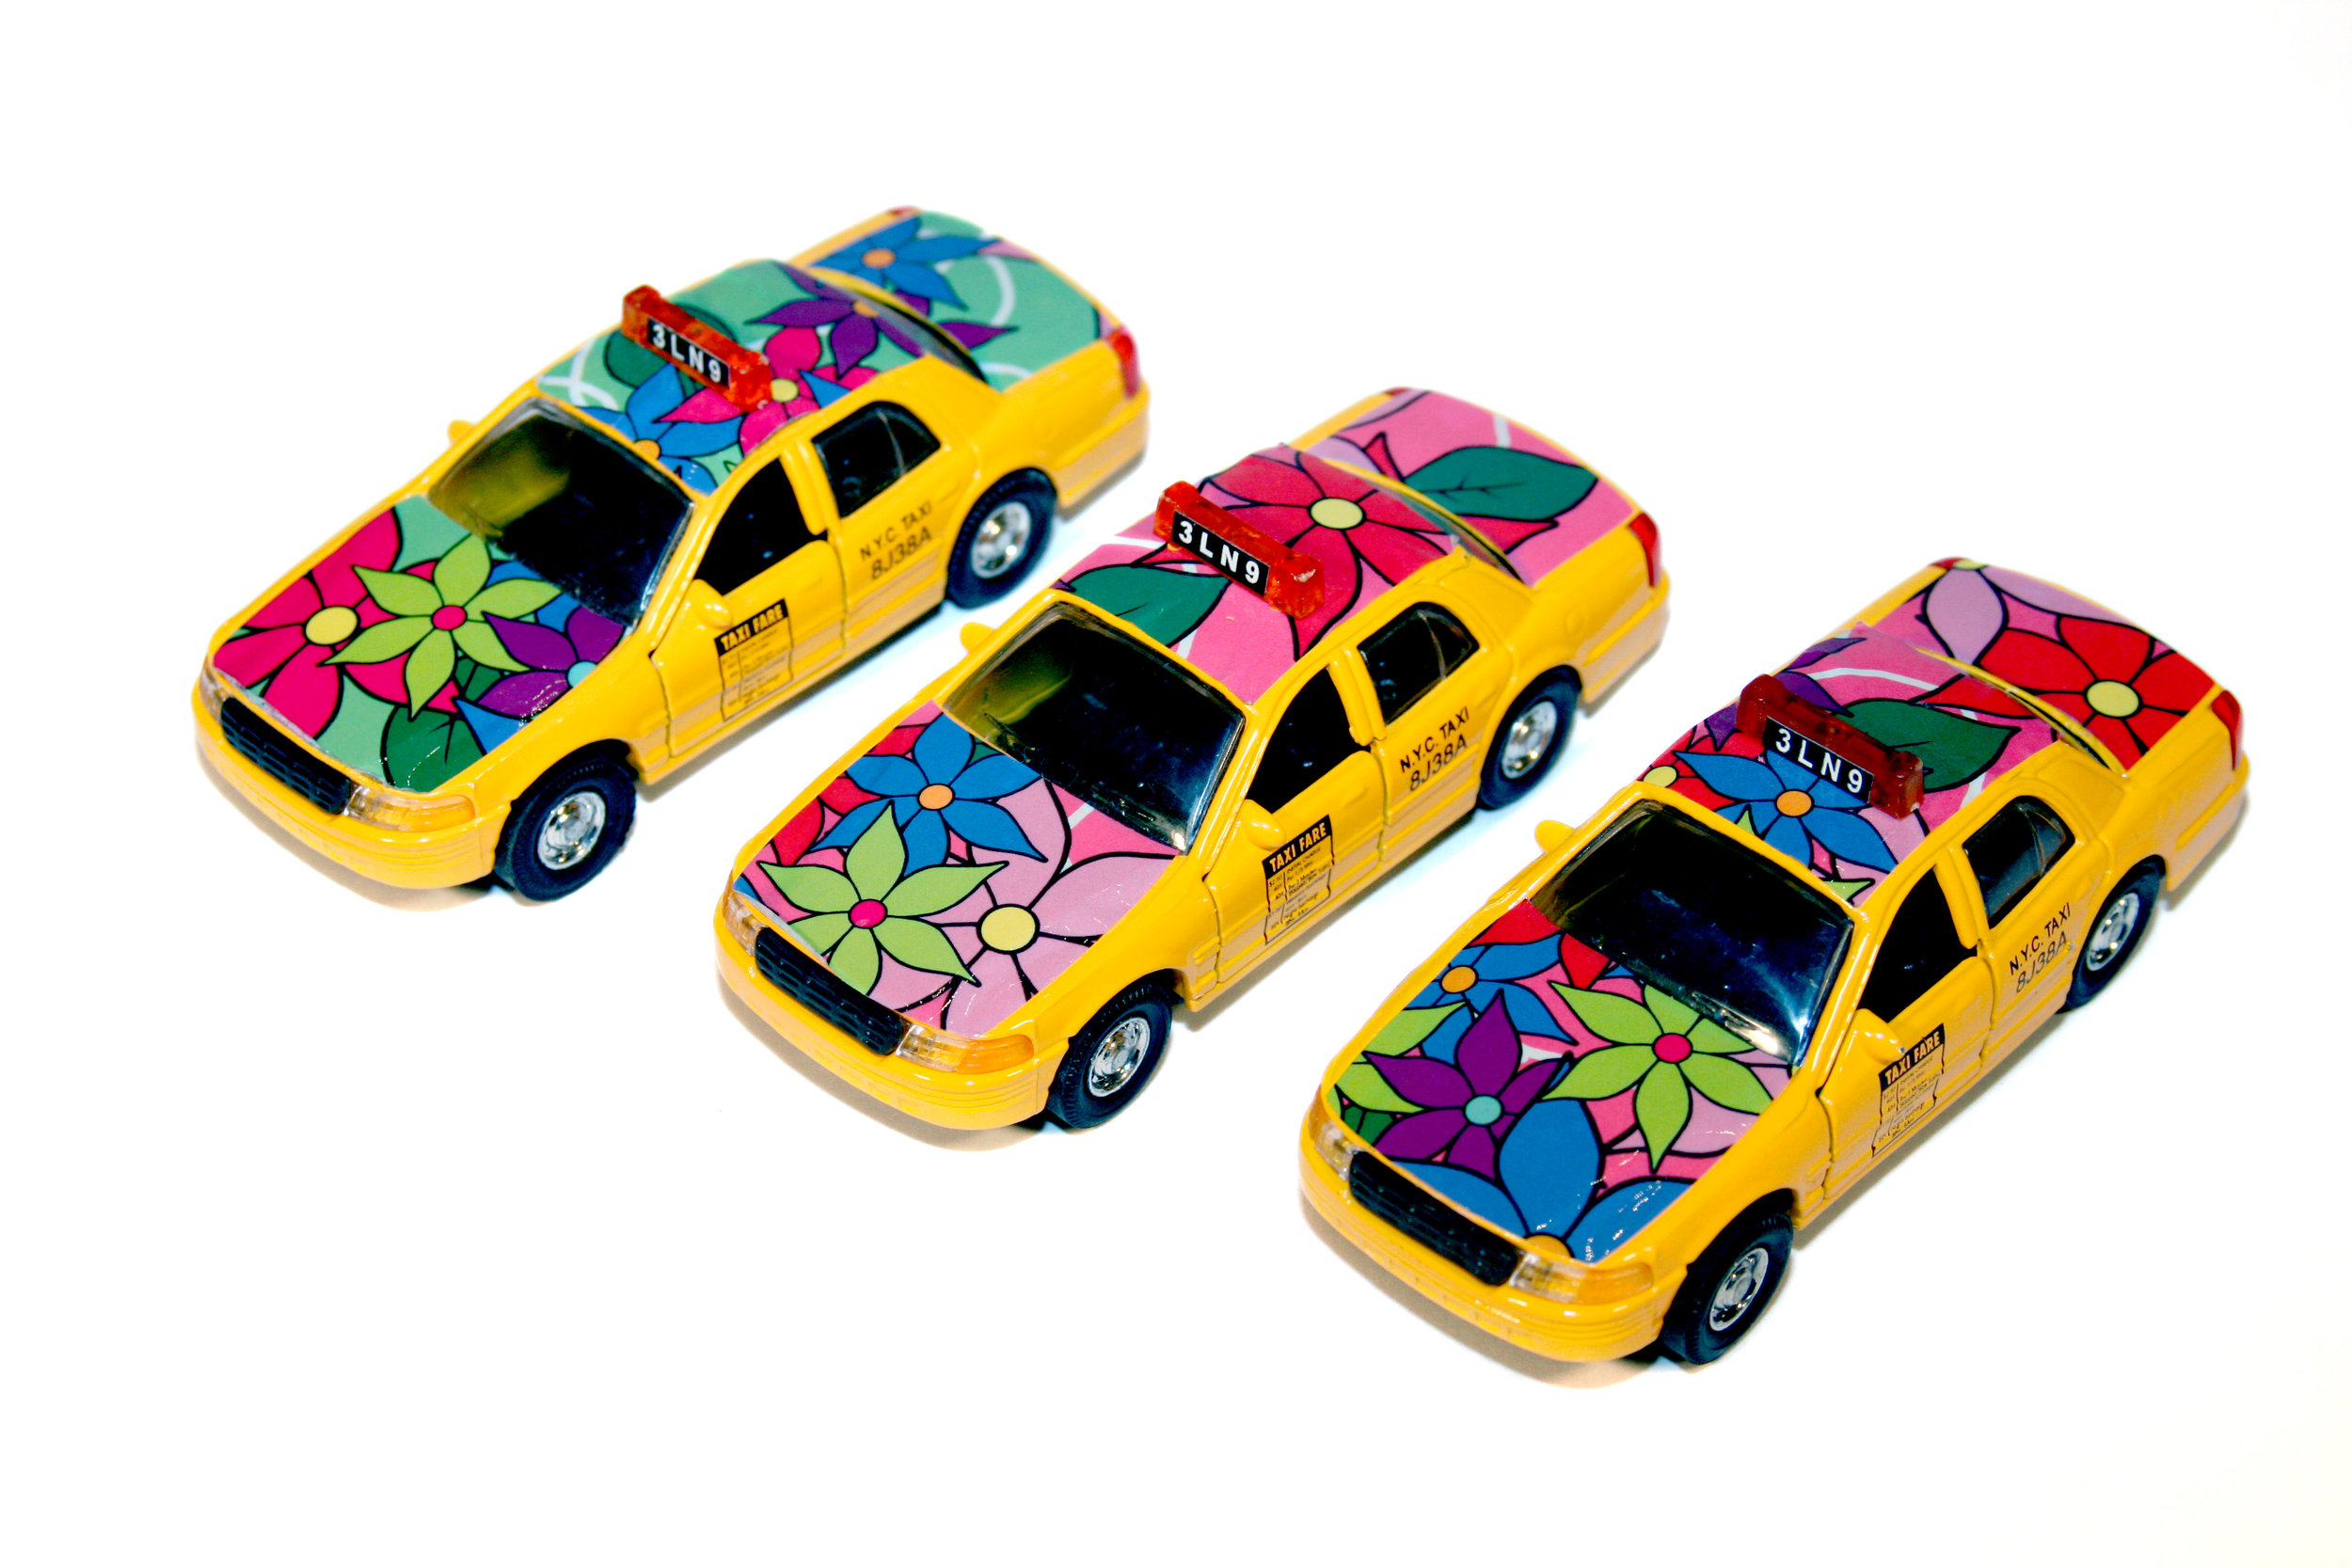 Garden in Transit Toy Taxis, 2007